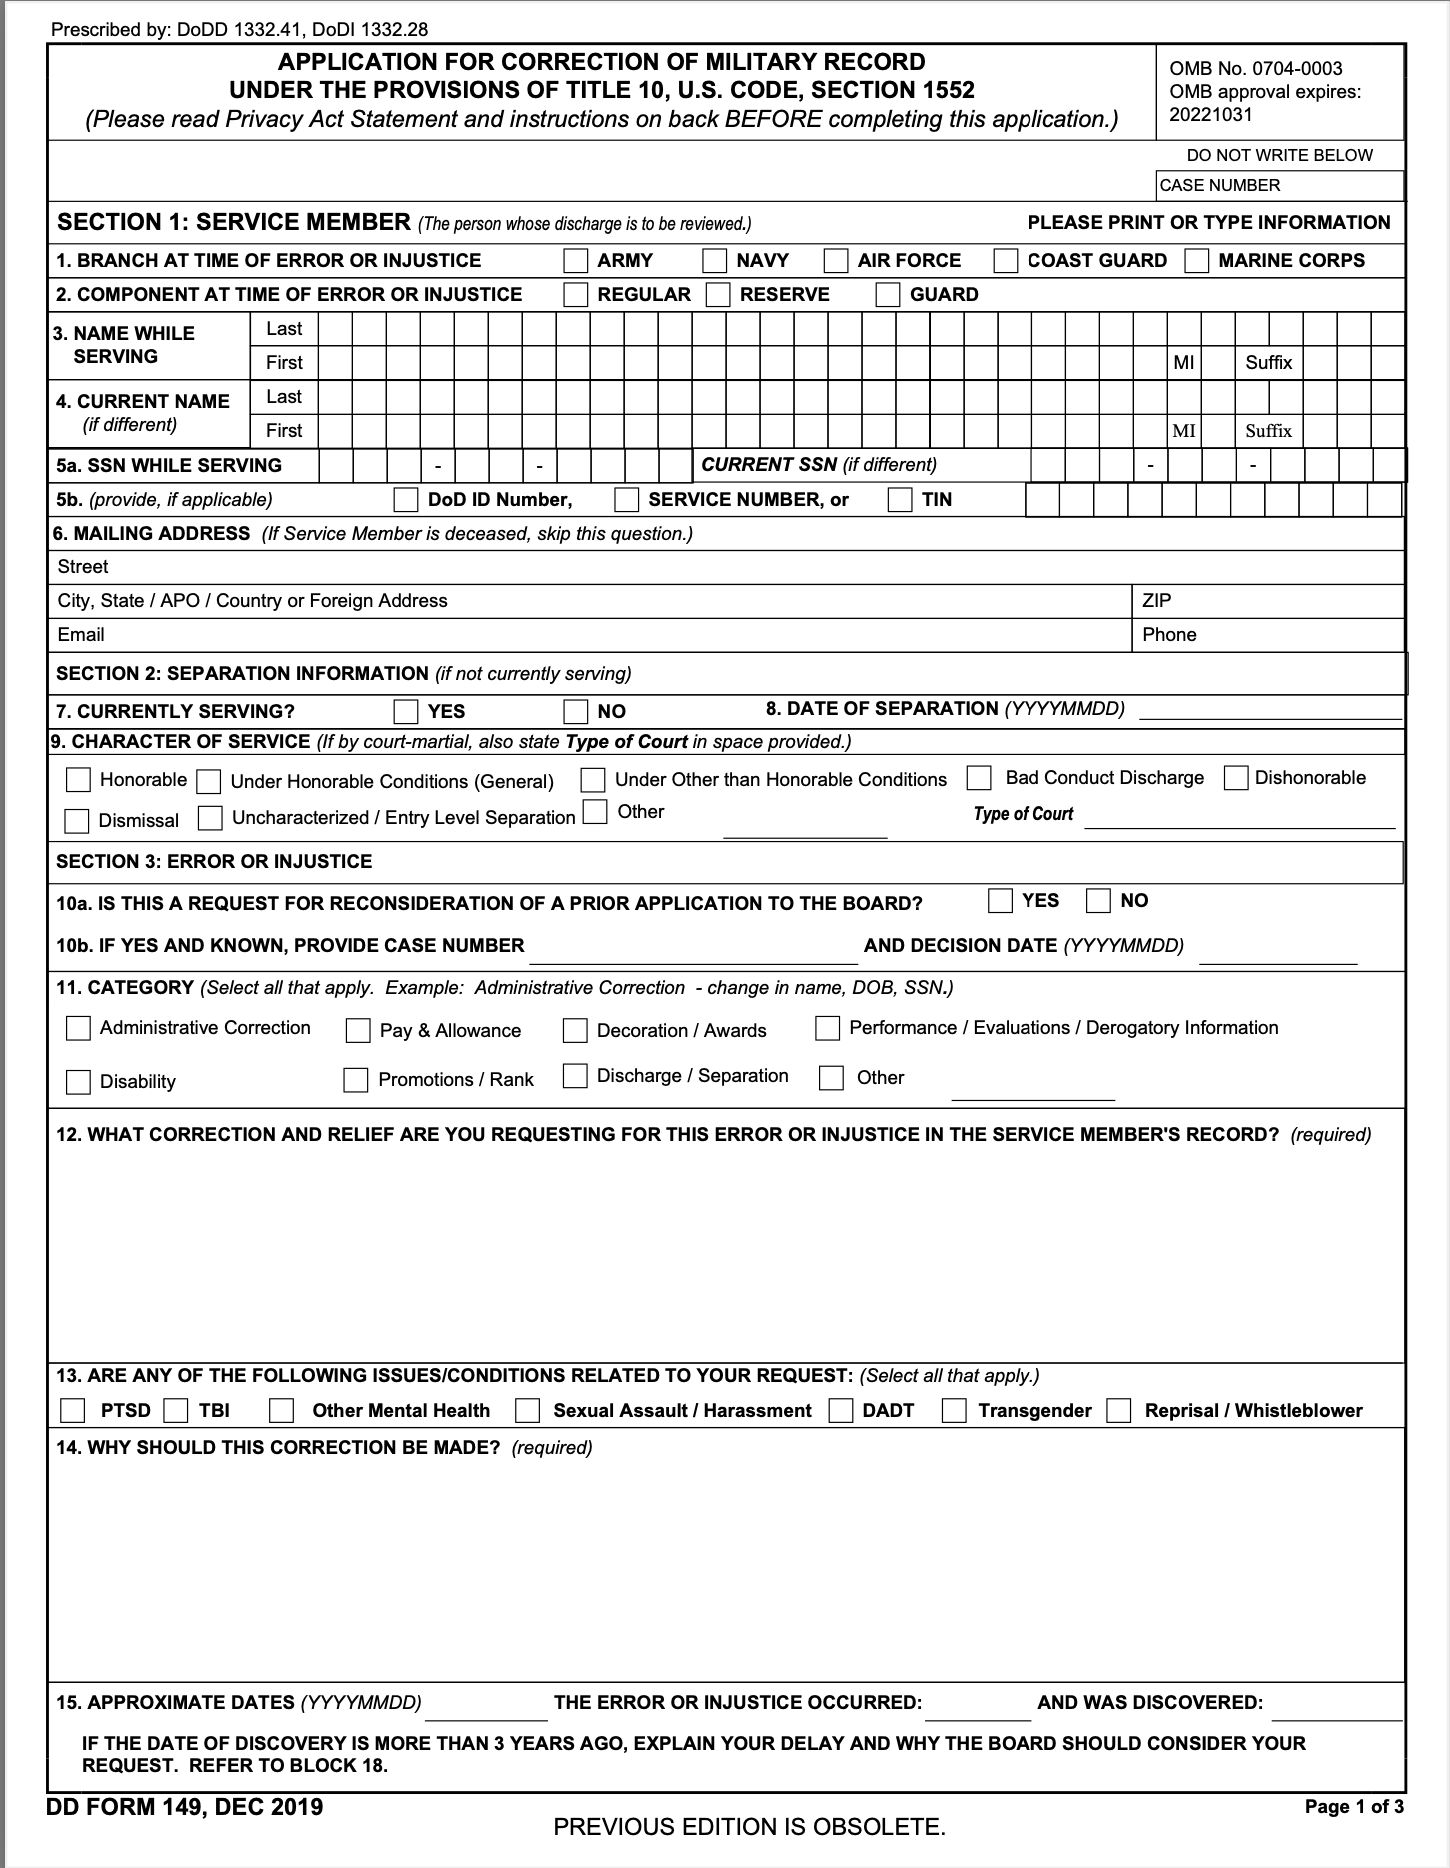 Application for Correction of Military Record - DD Form 149